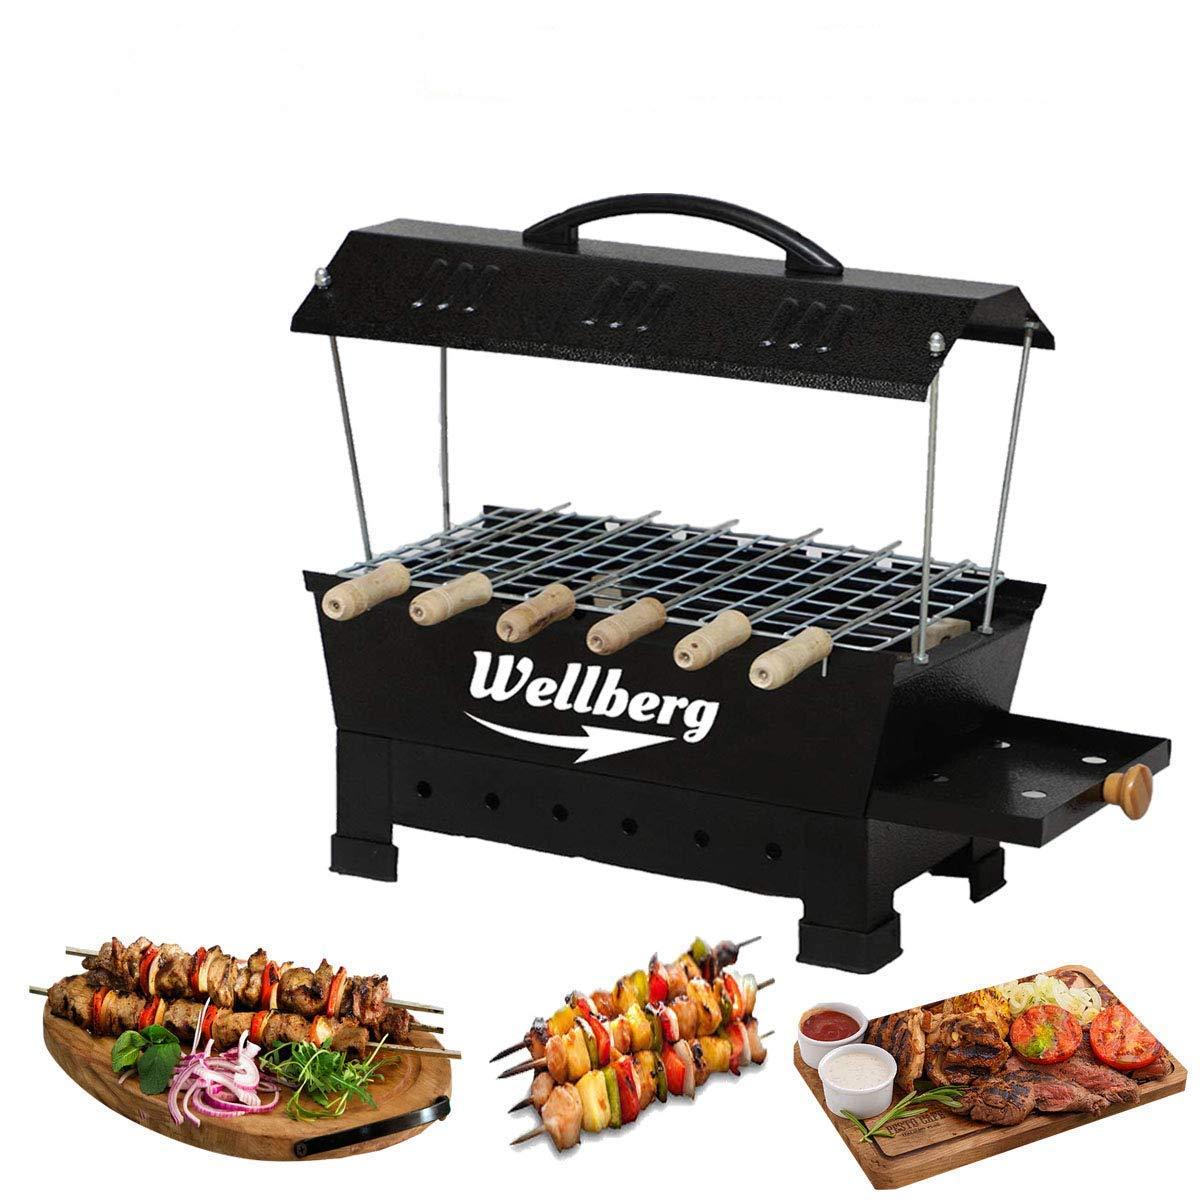 Wellberg Electric & Charcoal BBQ Grill | Tandoor Portable charcoal Barbecue | Stainless Steel Grill | - WELLBERG